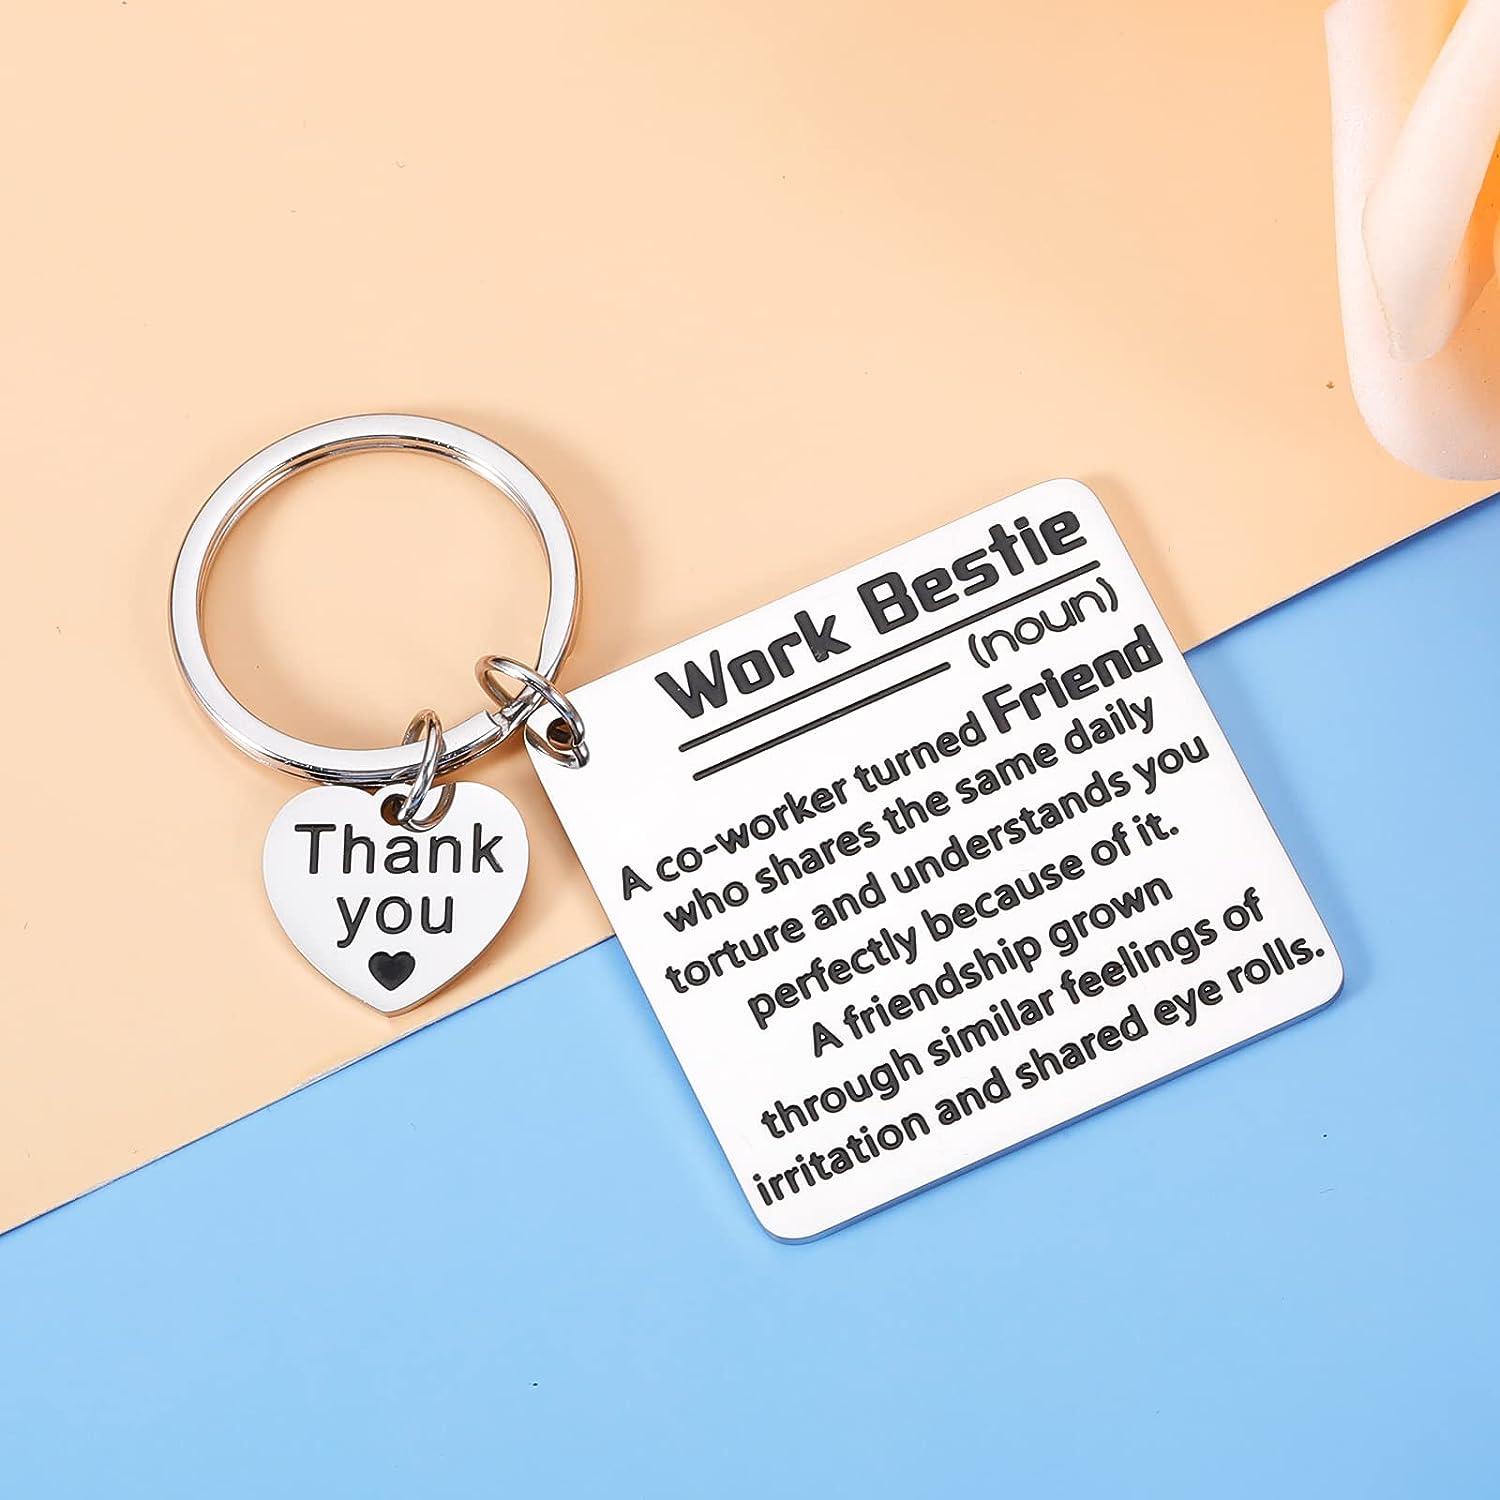 Funny Work Bestie Gifts for Women Best Friend Going Away Leaving Farewell  Gifts for Colleagues Boss Retirement Promotion Thank You Appreciation Gifts  for Coworker Friend Christmas Valentines Day Gift